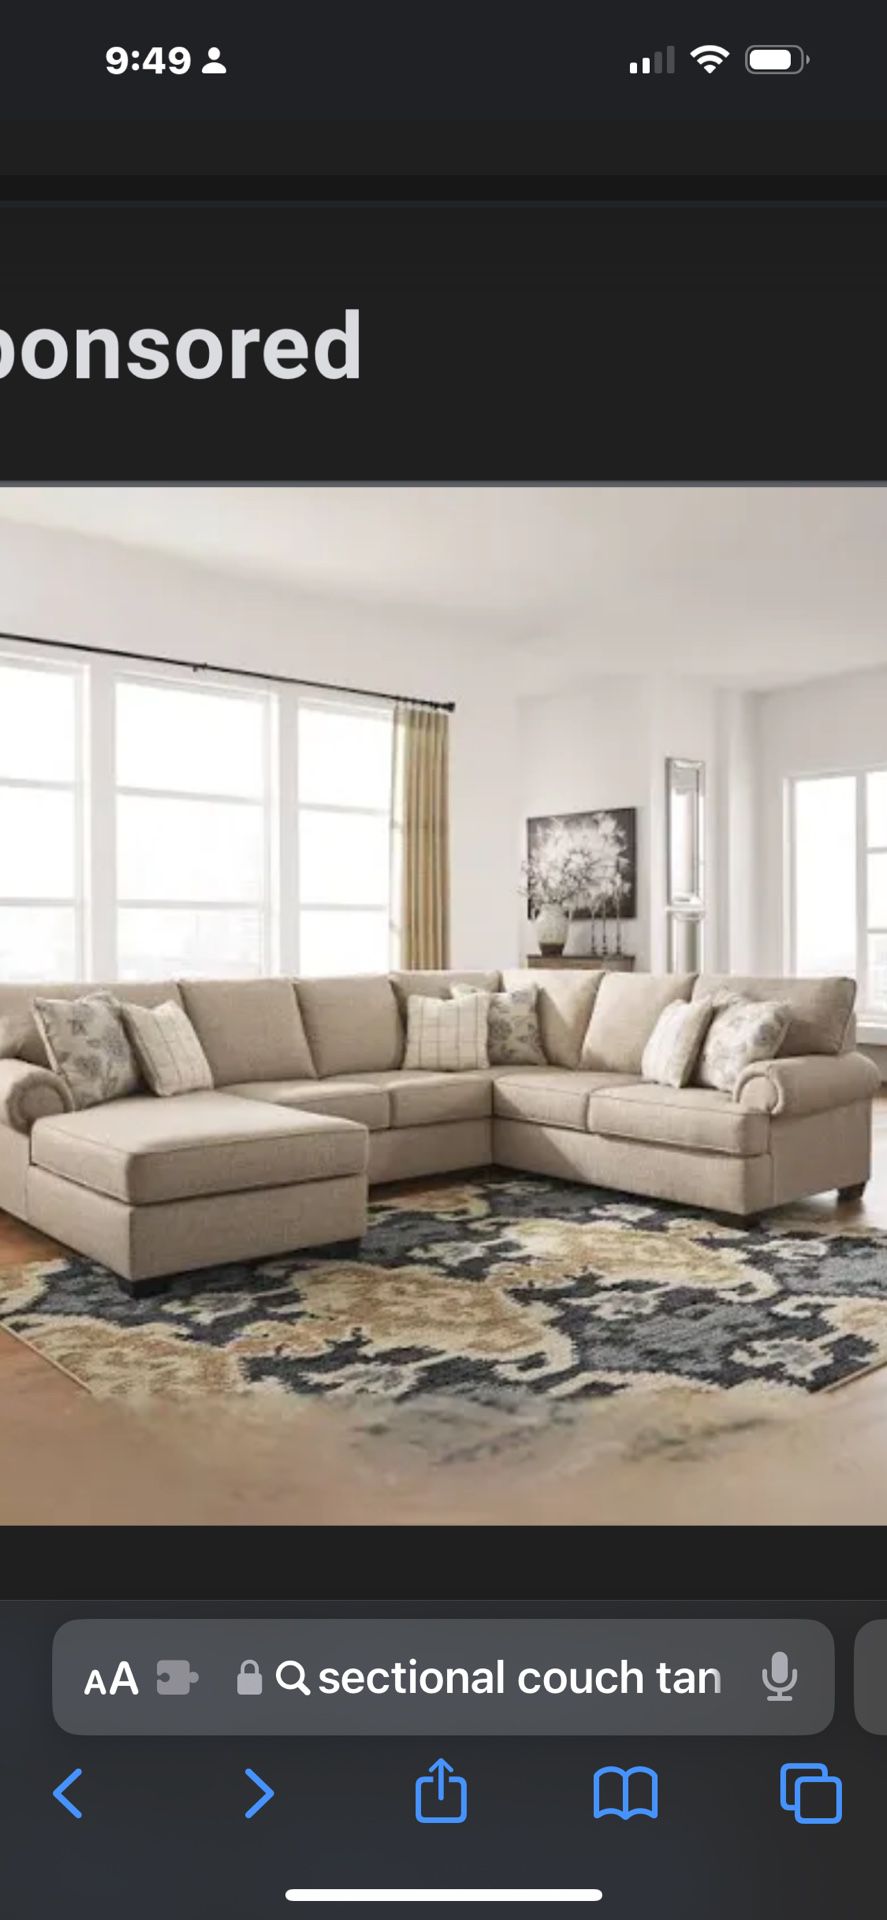 Couch, Sectional The Three Piece Tan